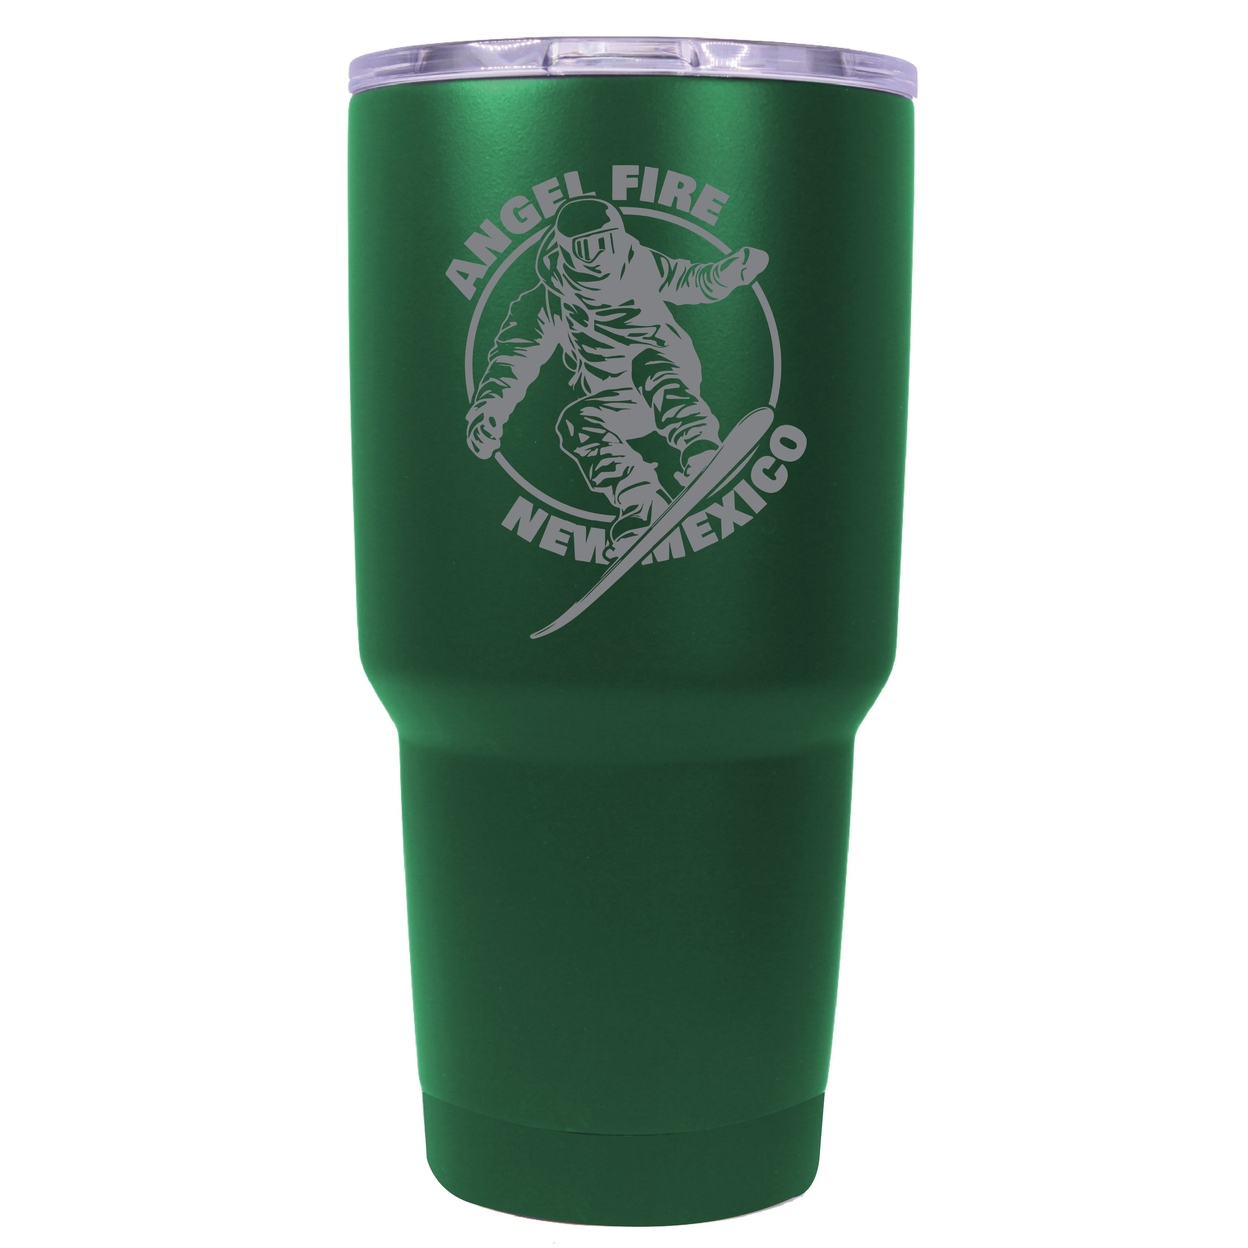 Angel Fire New Mexico Souvenir 24 Oz Engraved Insulated Stainless Steel Tumbler - Green,,Single Unit